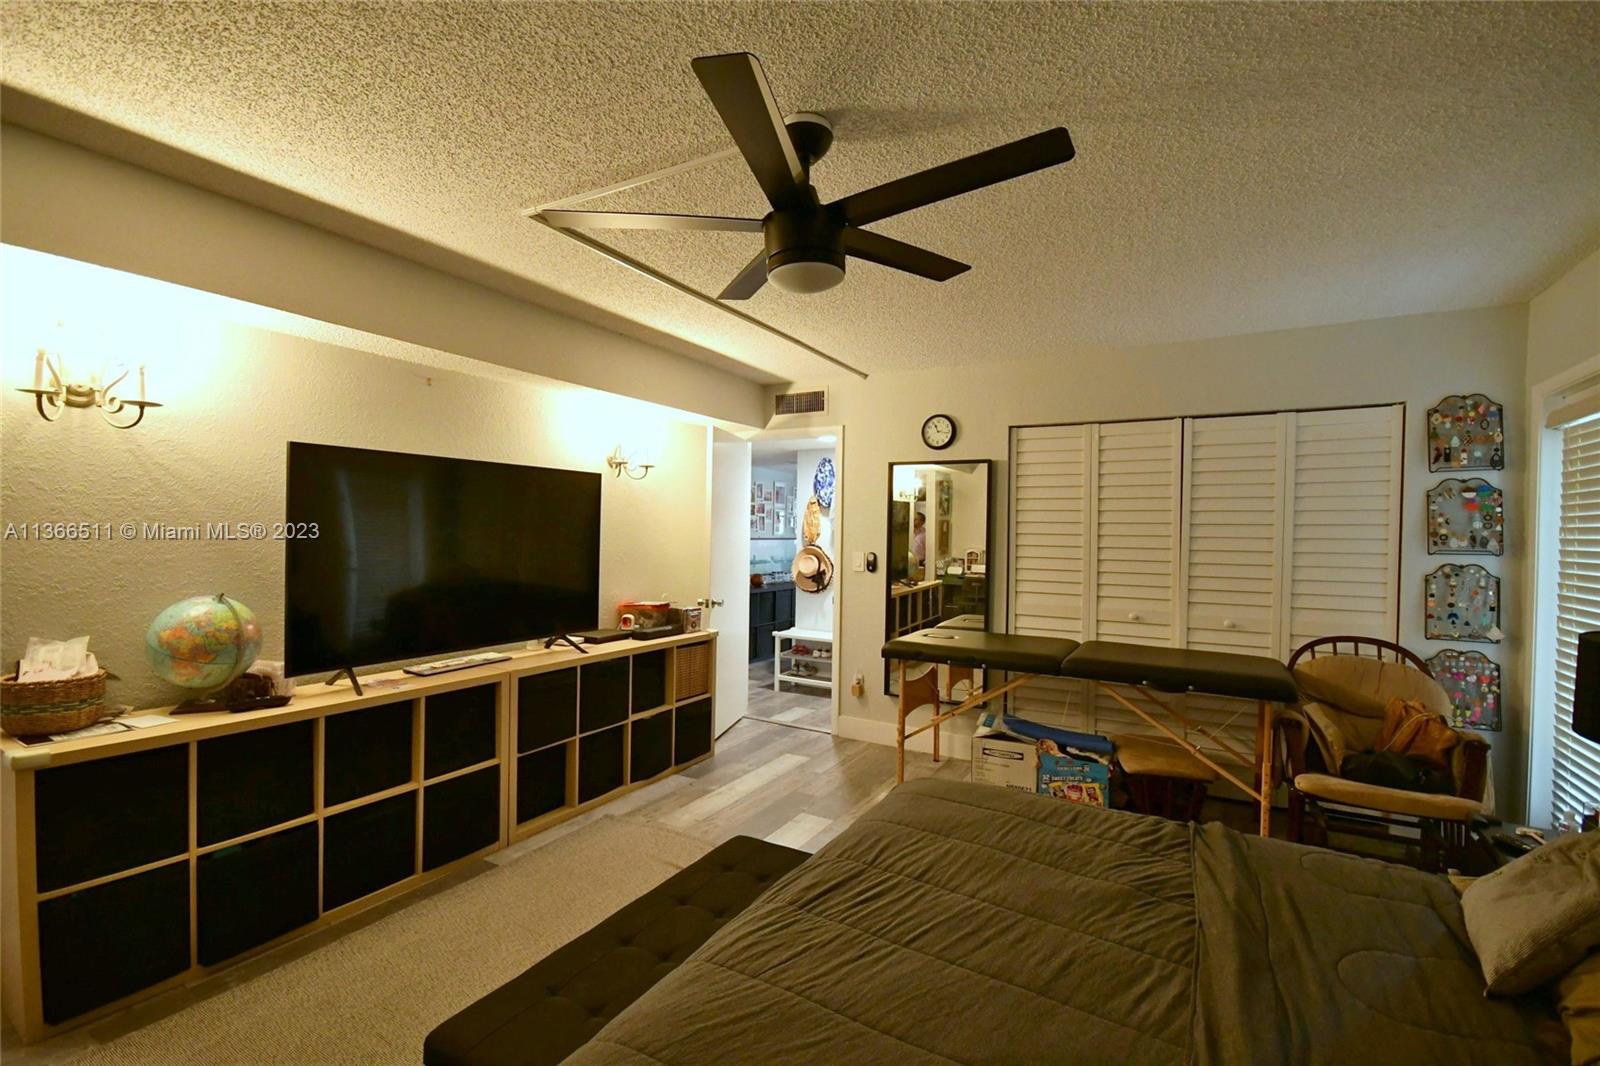 a view of a livingroom with furniture and a flat screen tv